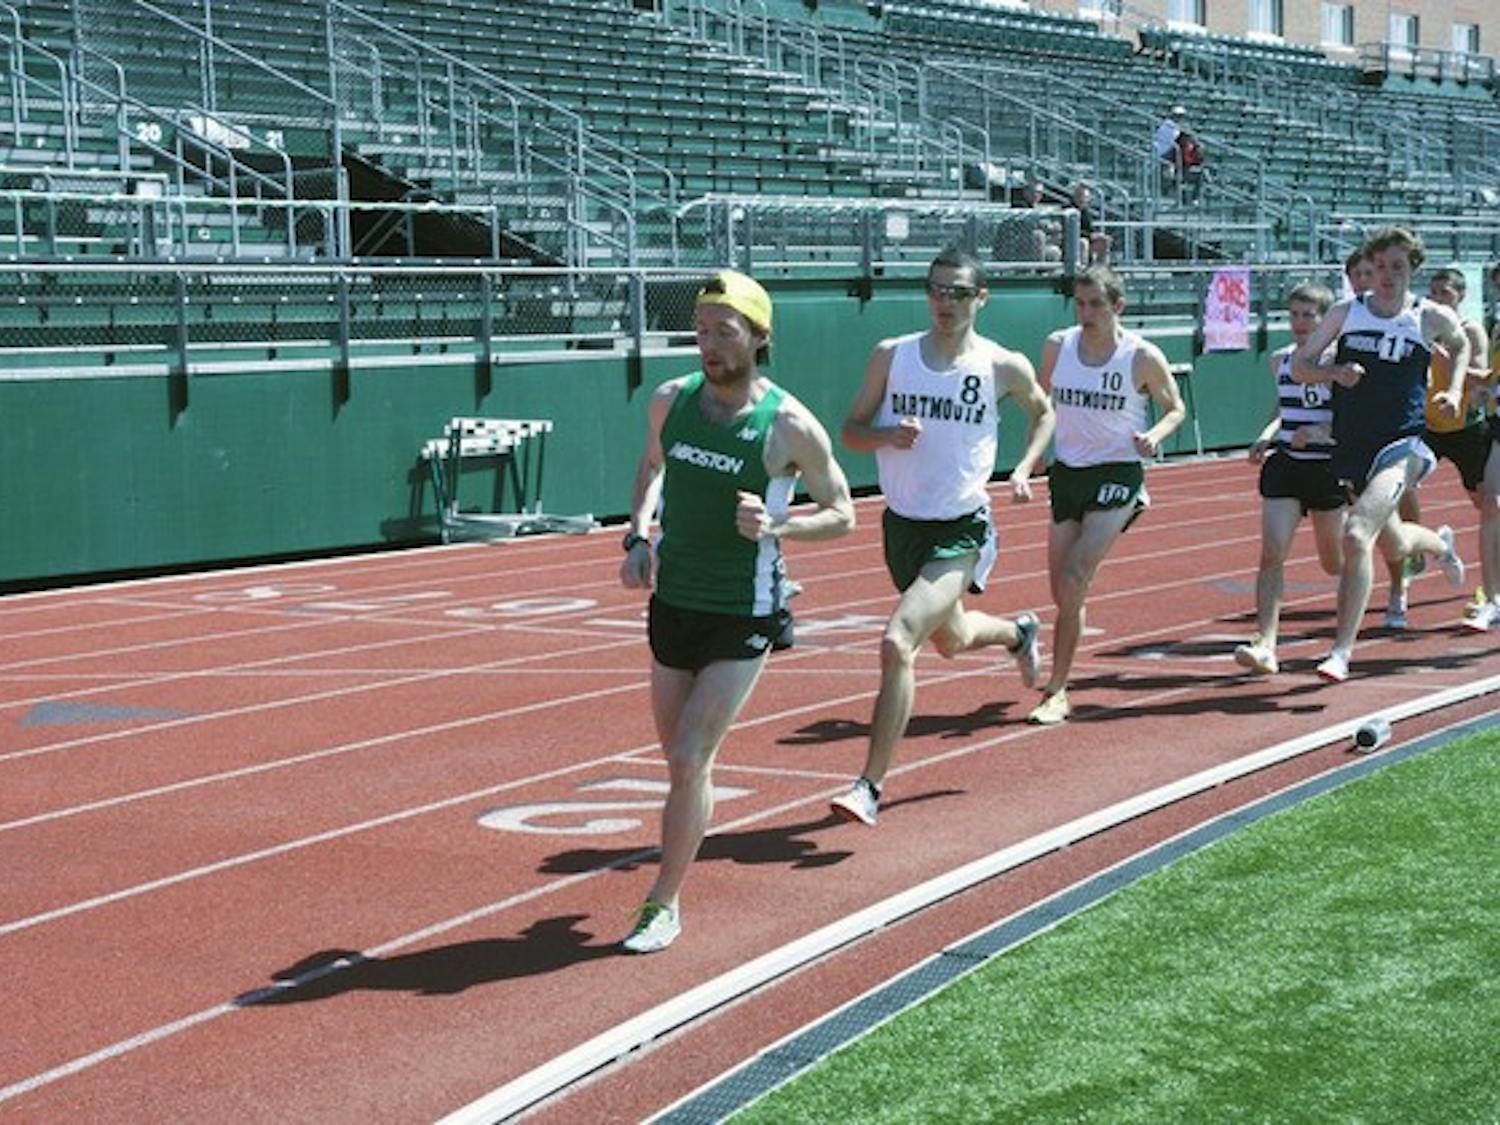 The Dartmouth men's and women's track and field teams earned nine and 12 first-place finishes, respectively.